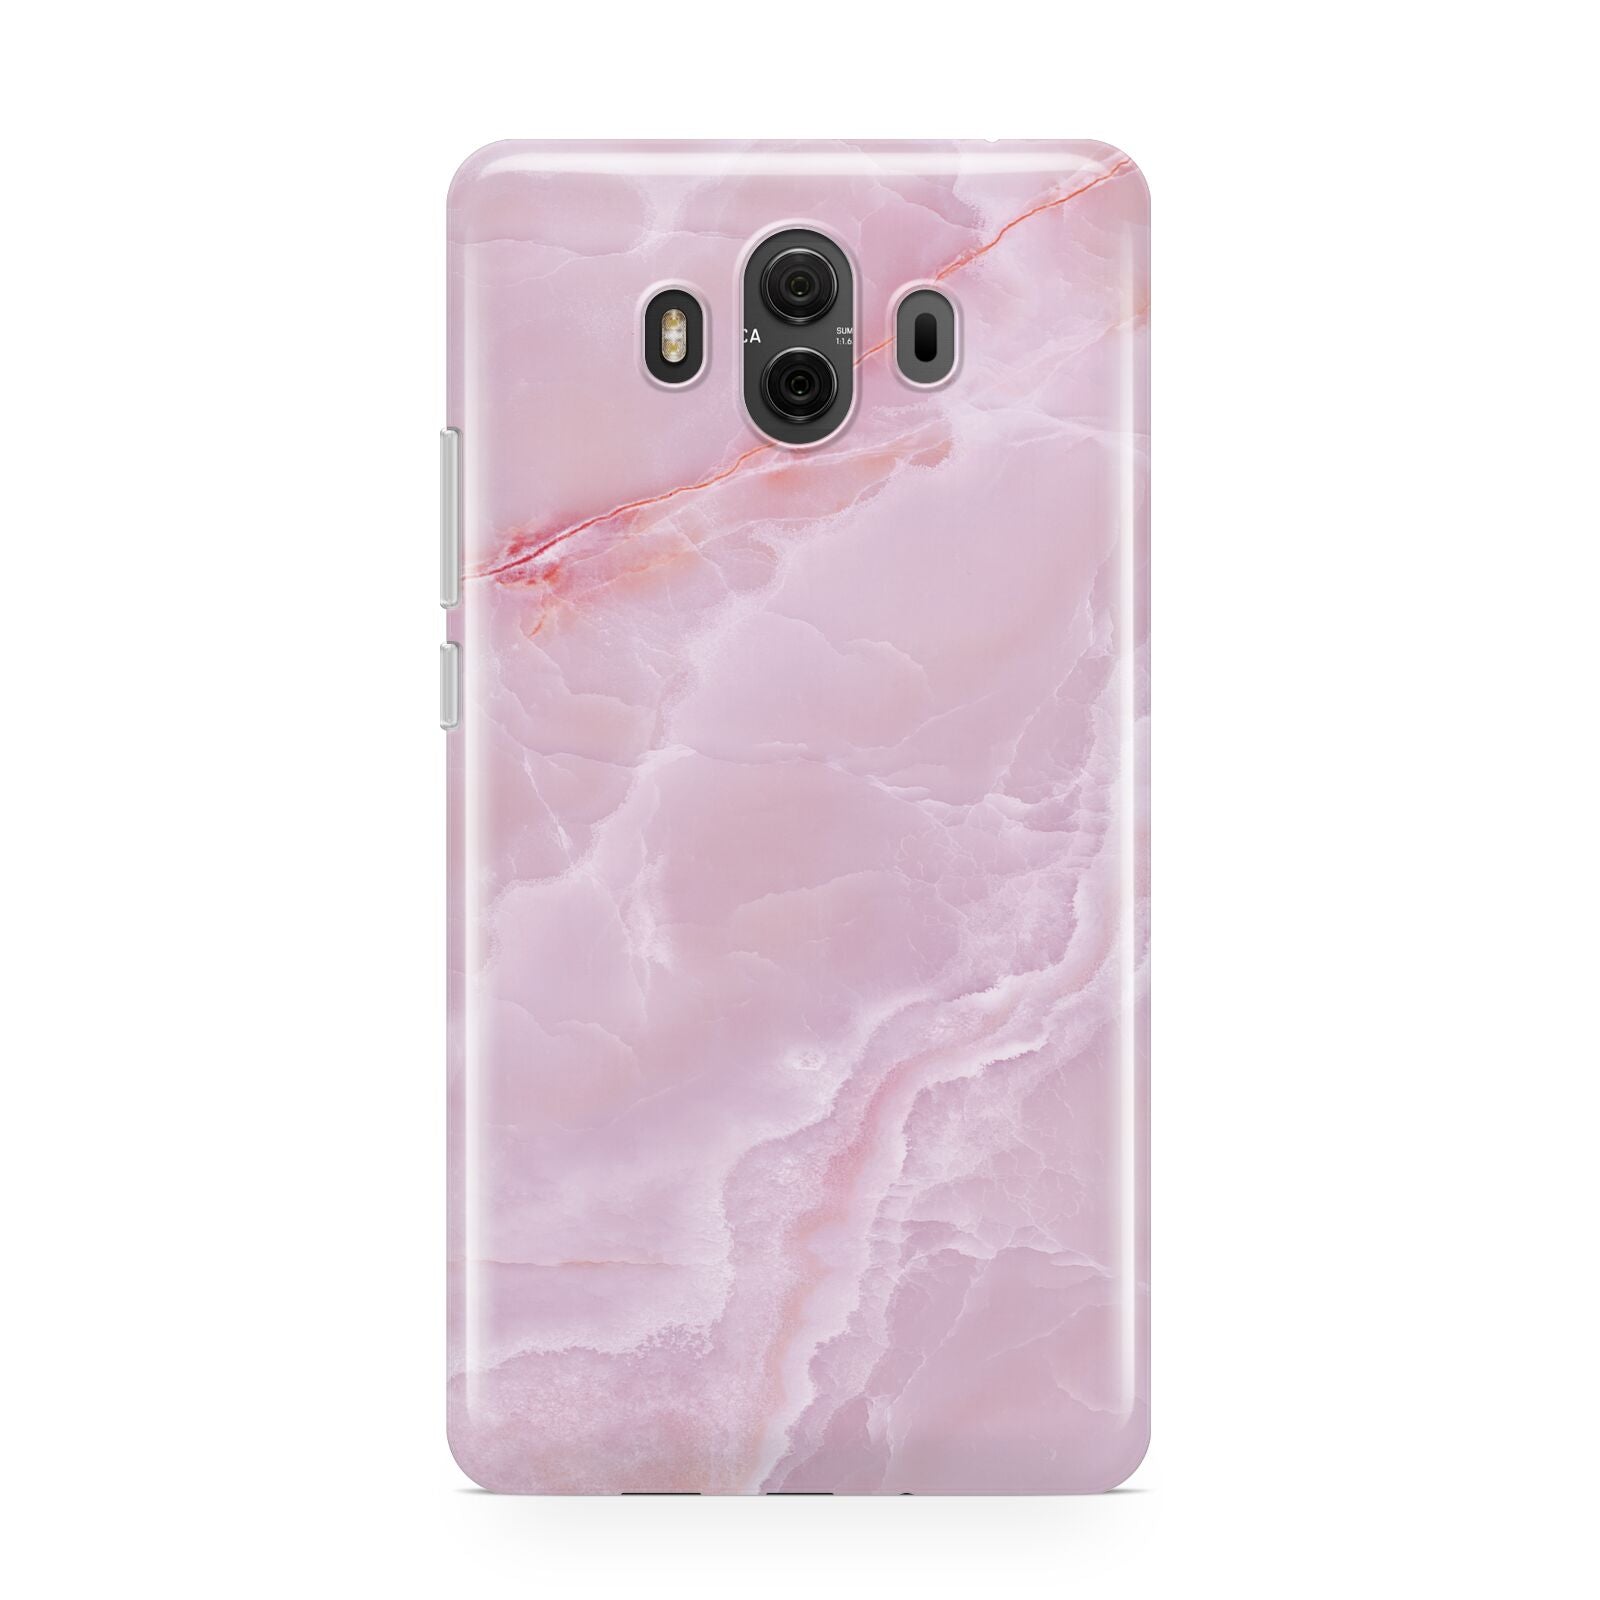 Dreamy Pink Marble Huawei Mate 10 Protective Phone Case